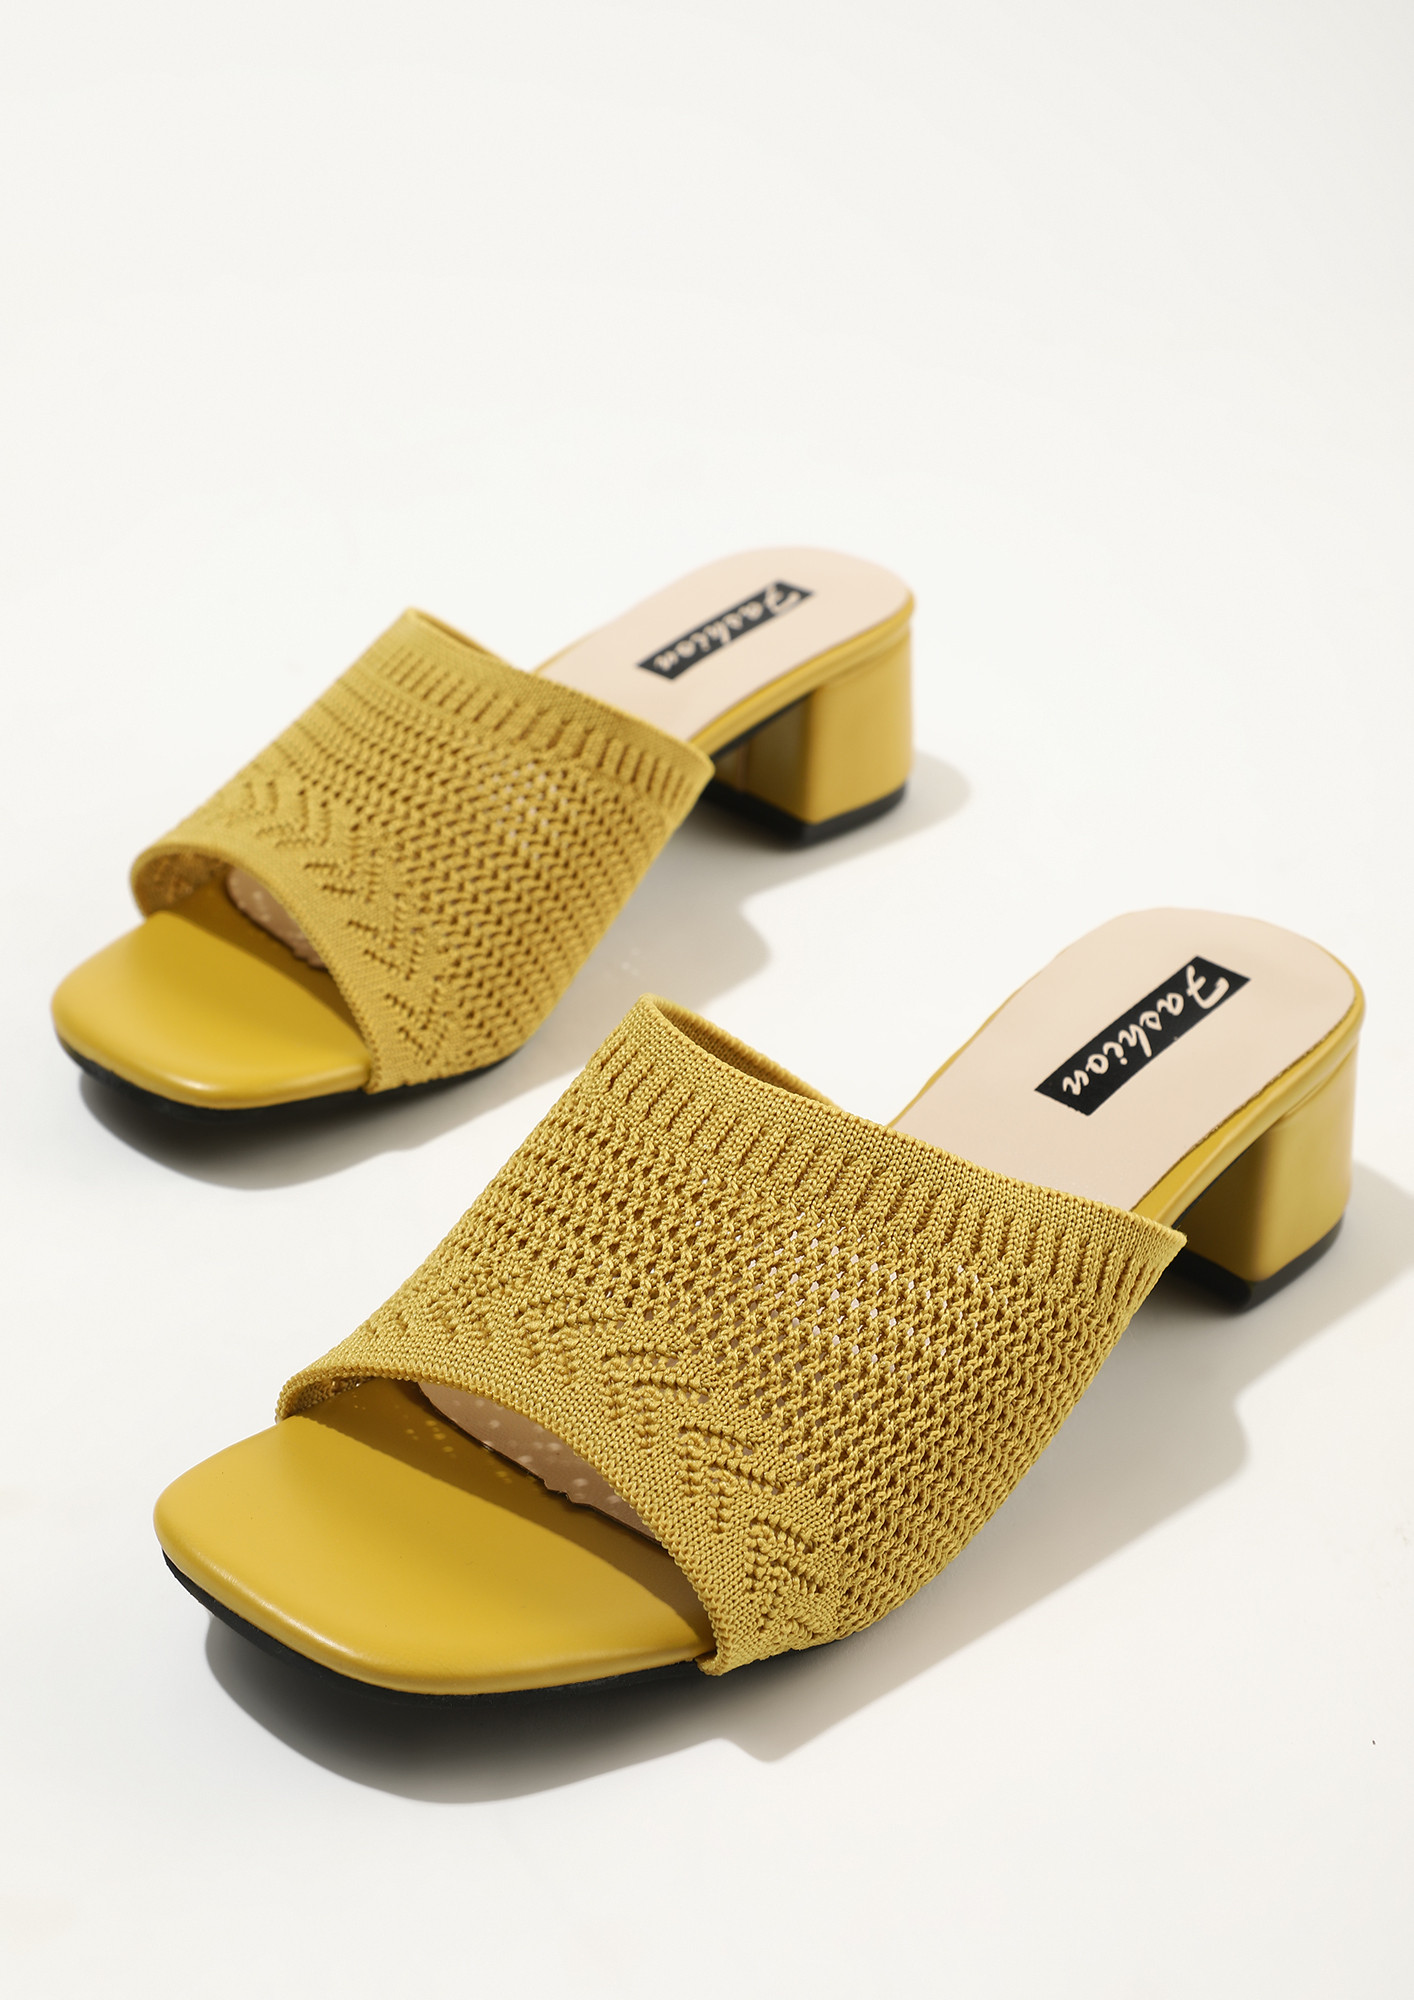 WITH A FEMININE TOUCH YELLOW LOW HEELED MULES